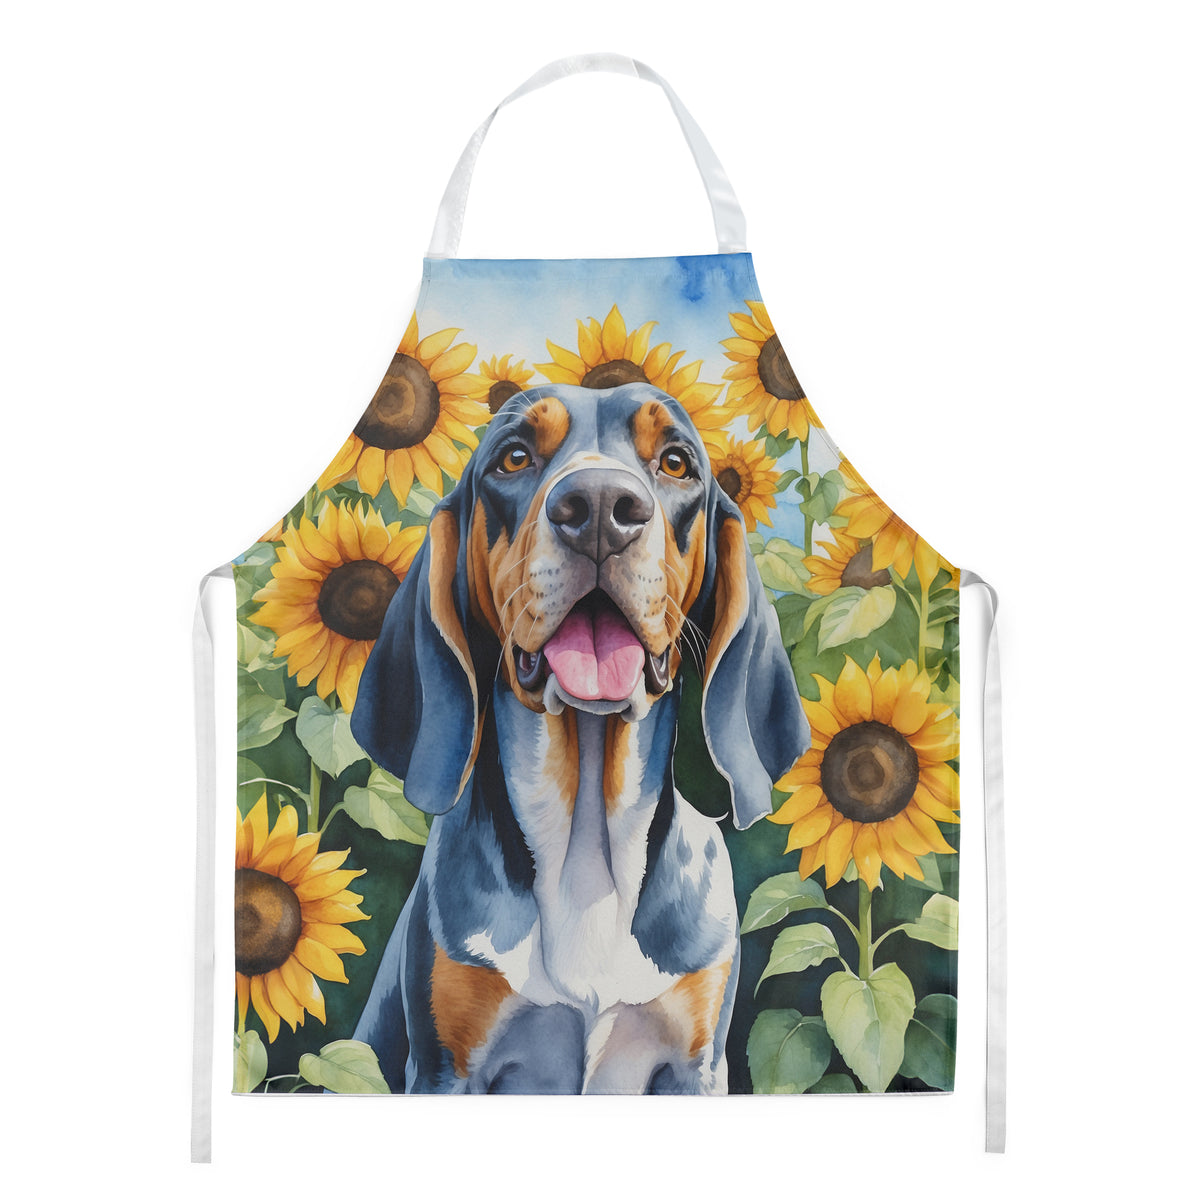 Buy this American English Coonhound in Sunflowers Apron